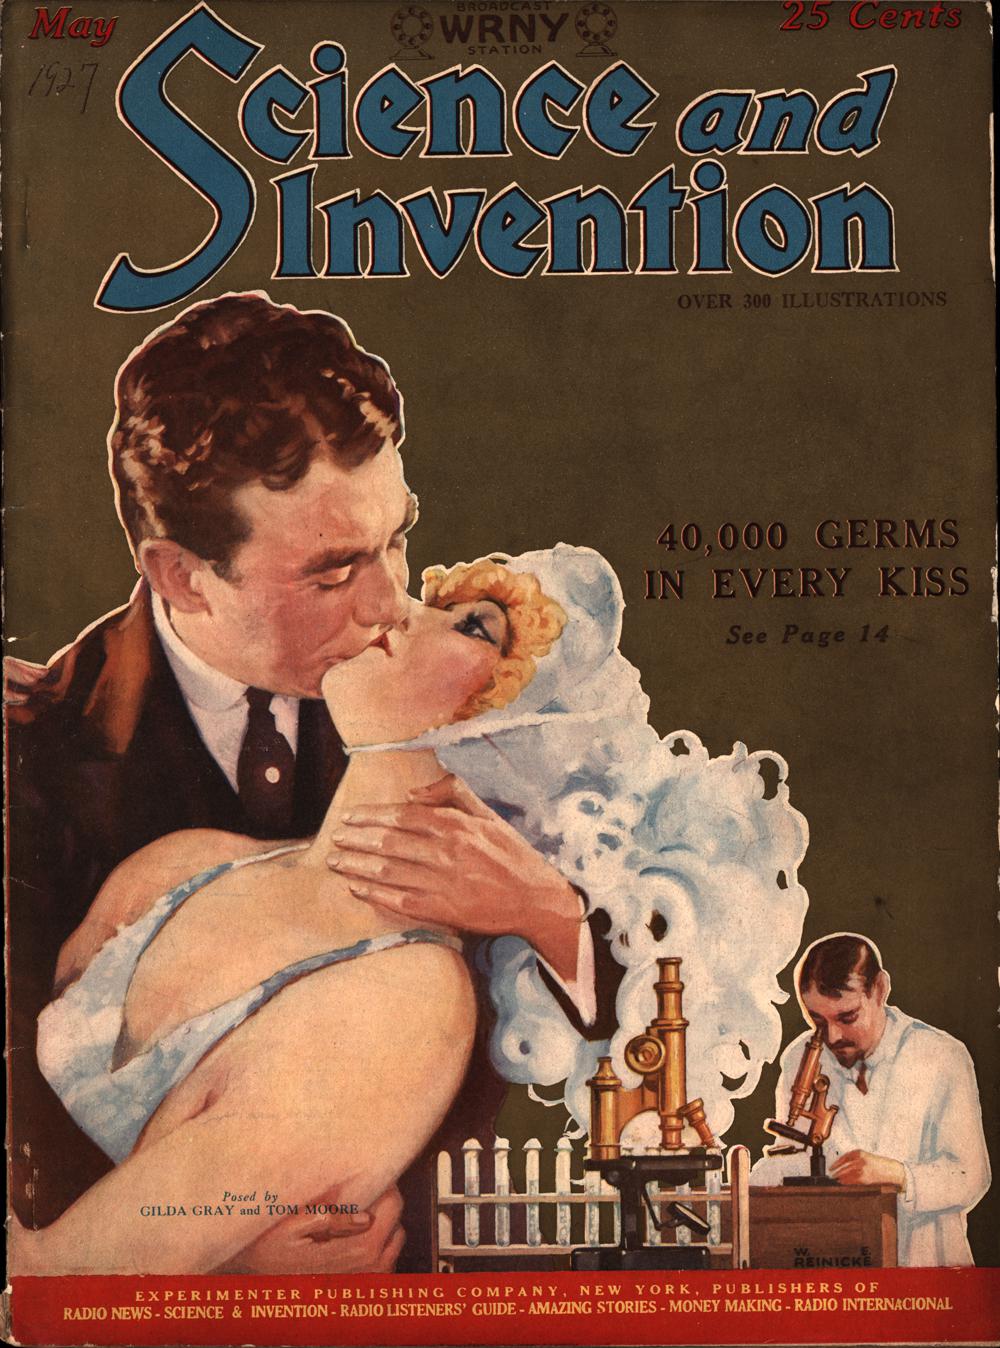 1927 - Science and invention - Vol. 15, No. 1